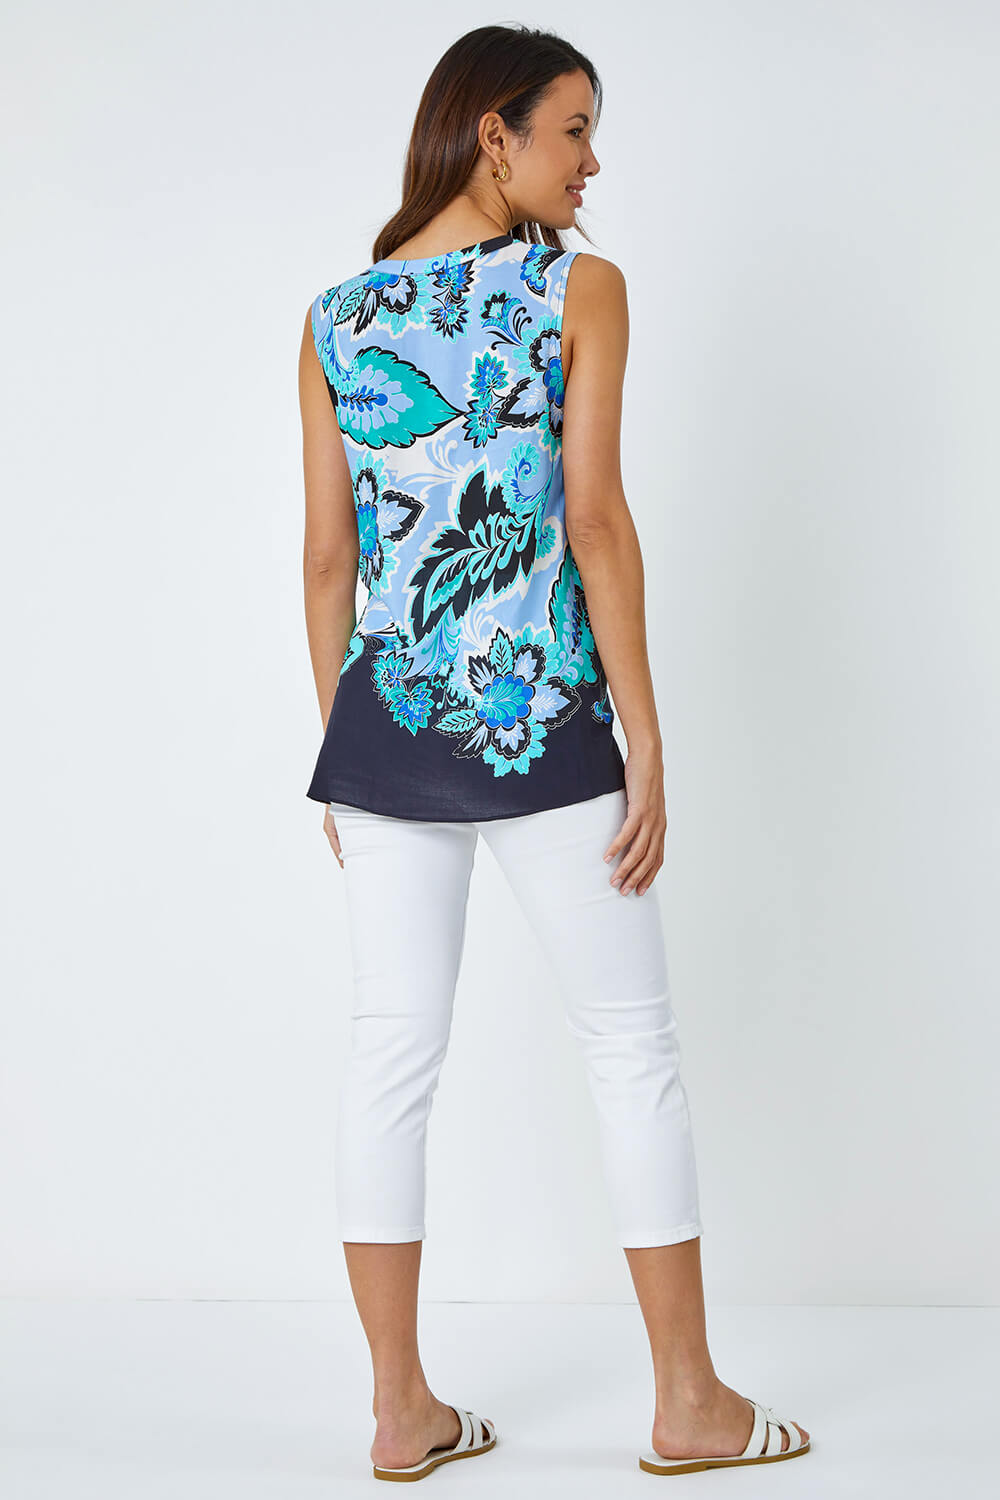 Blue Paisley Contrast Border Print Top, Image 3 of 5